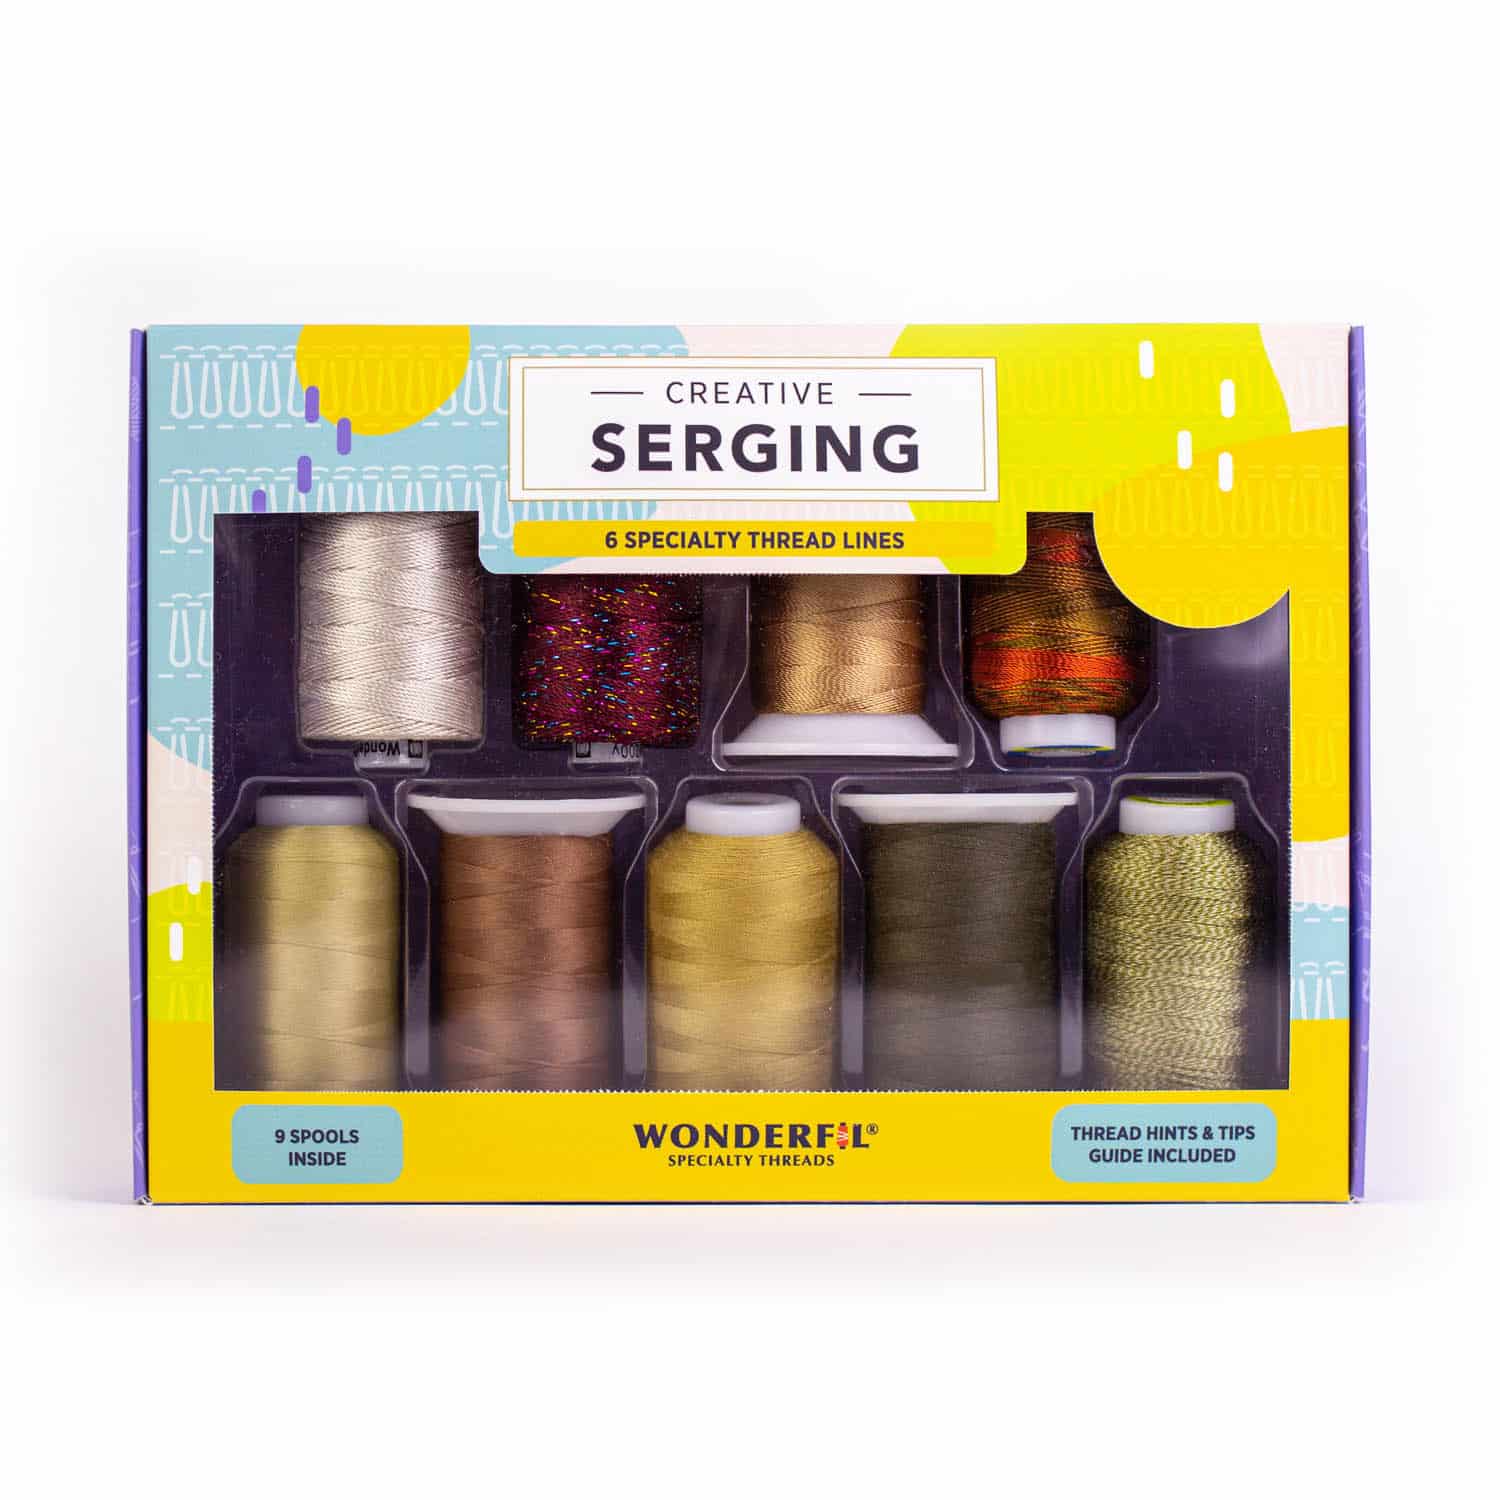 Serging with Filaine Thread for Soft, Fuzzy Seams - Sulky